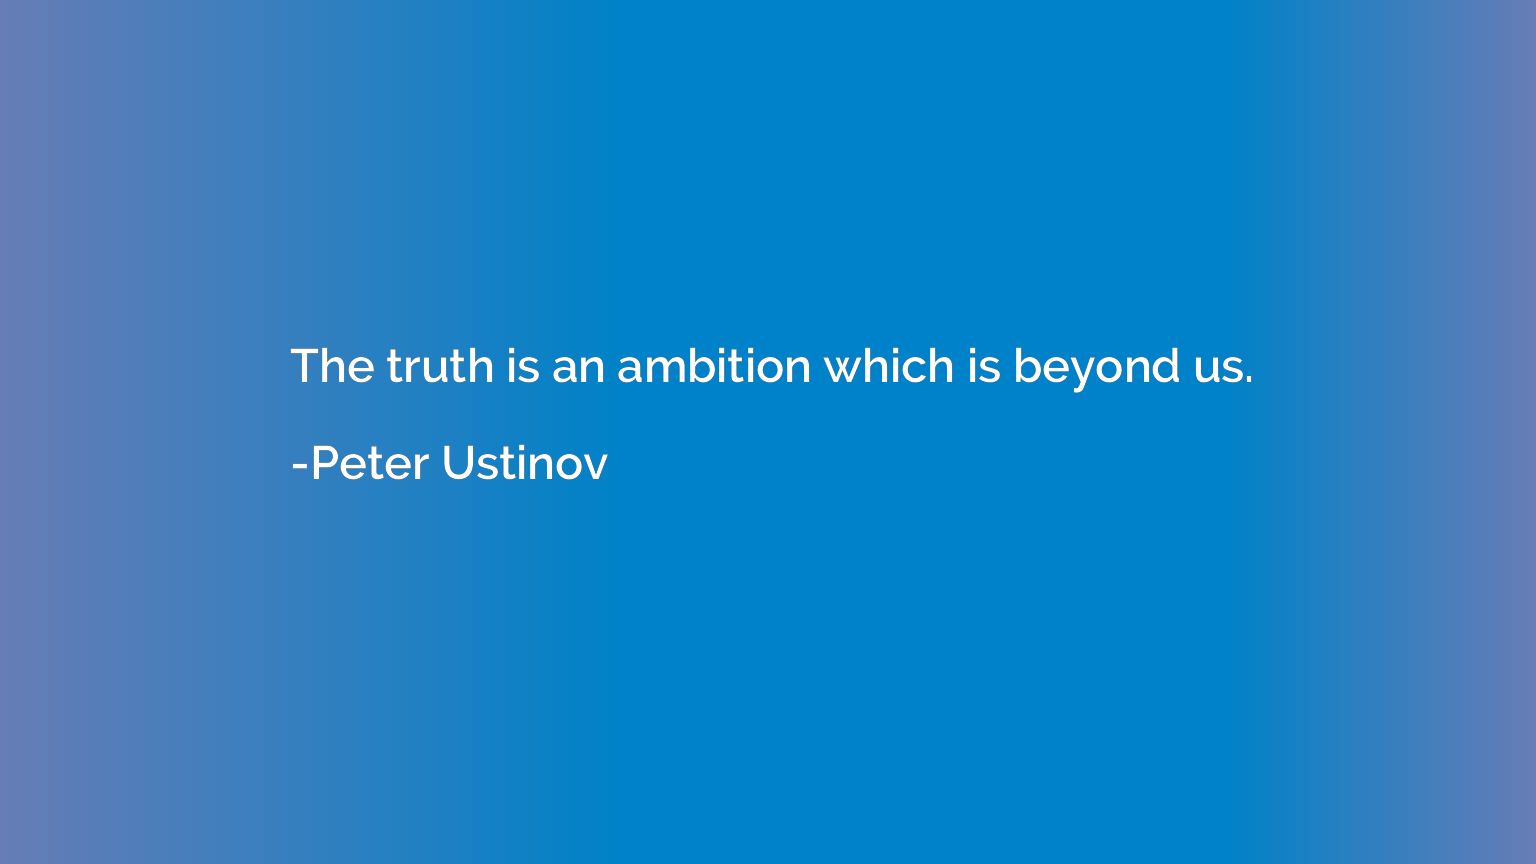 The truth is an ambition which is beyond us.